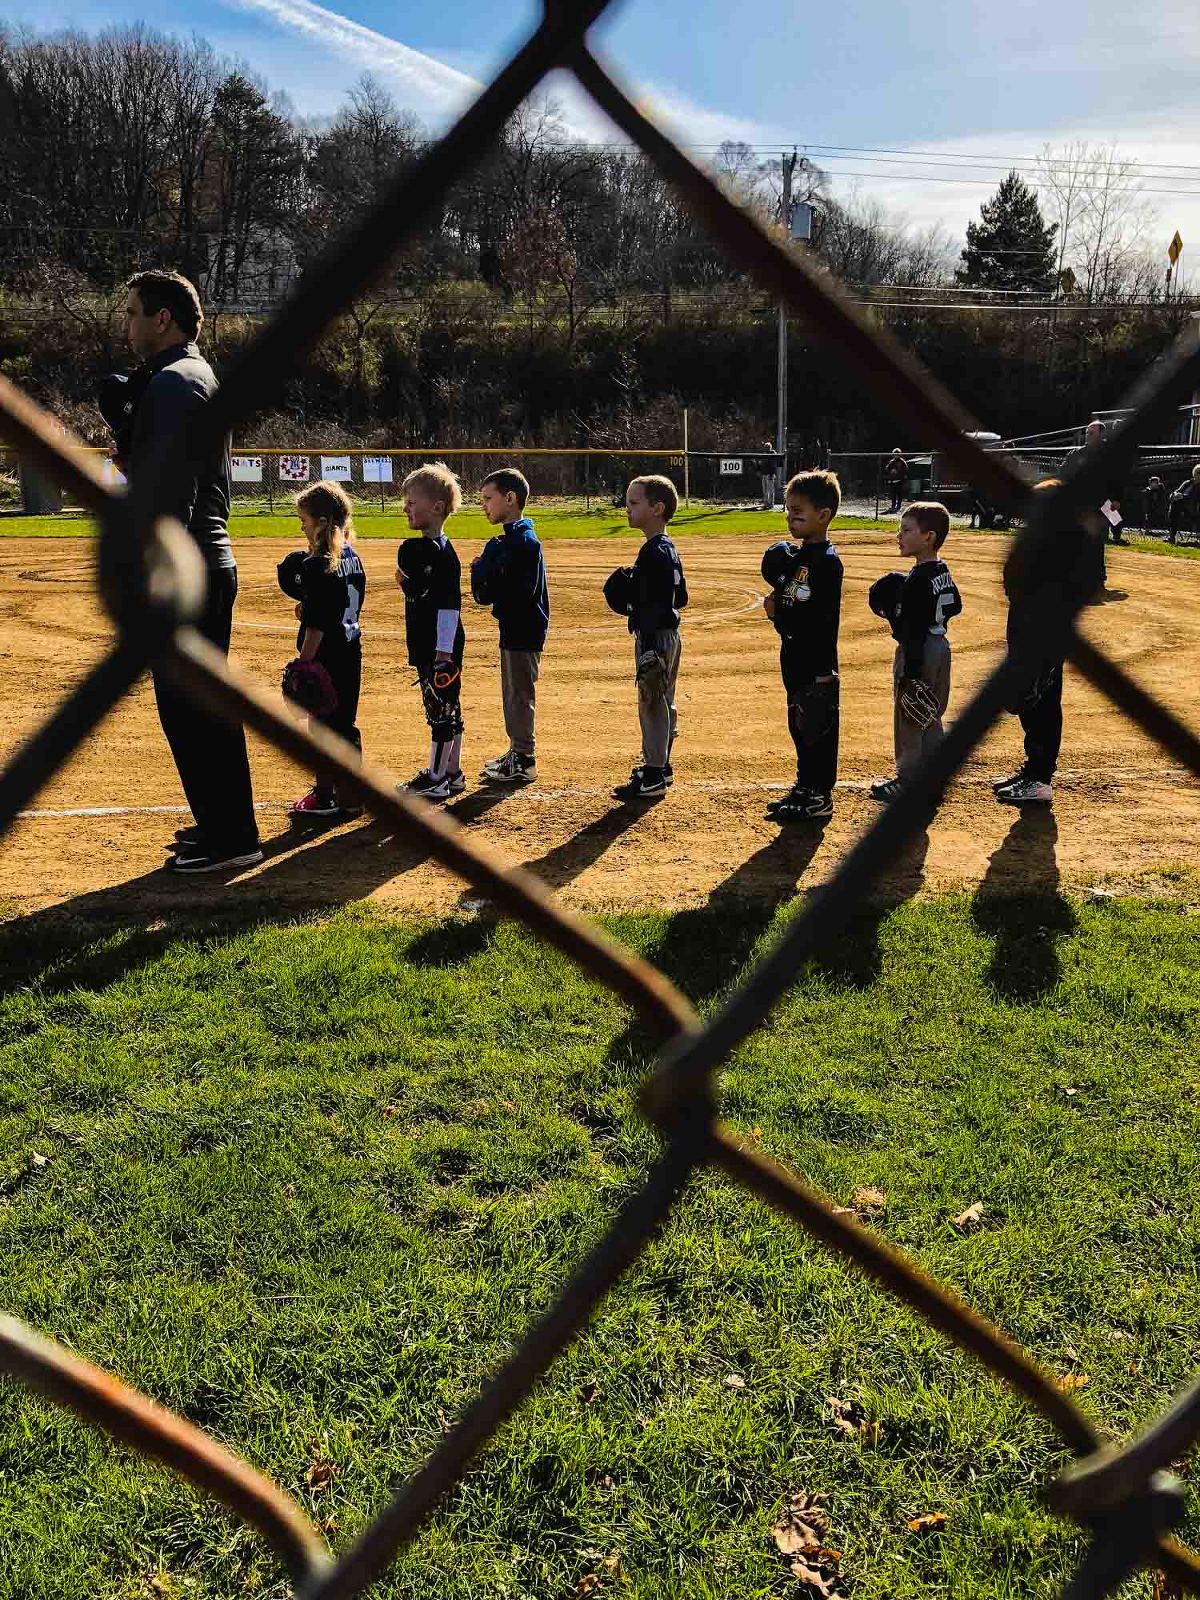 baseball team lined up for the anthem, as photographed through the chain link fence